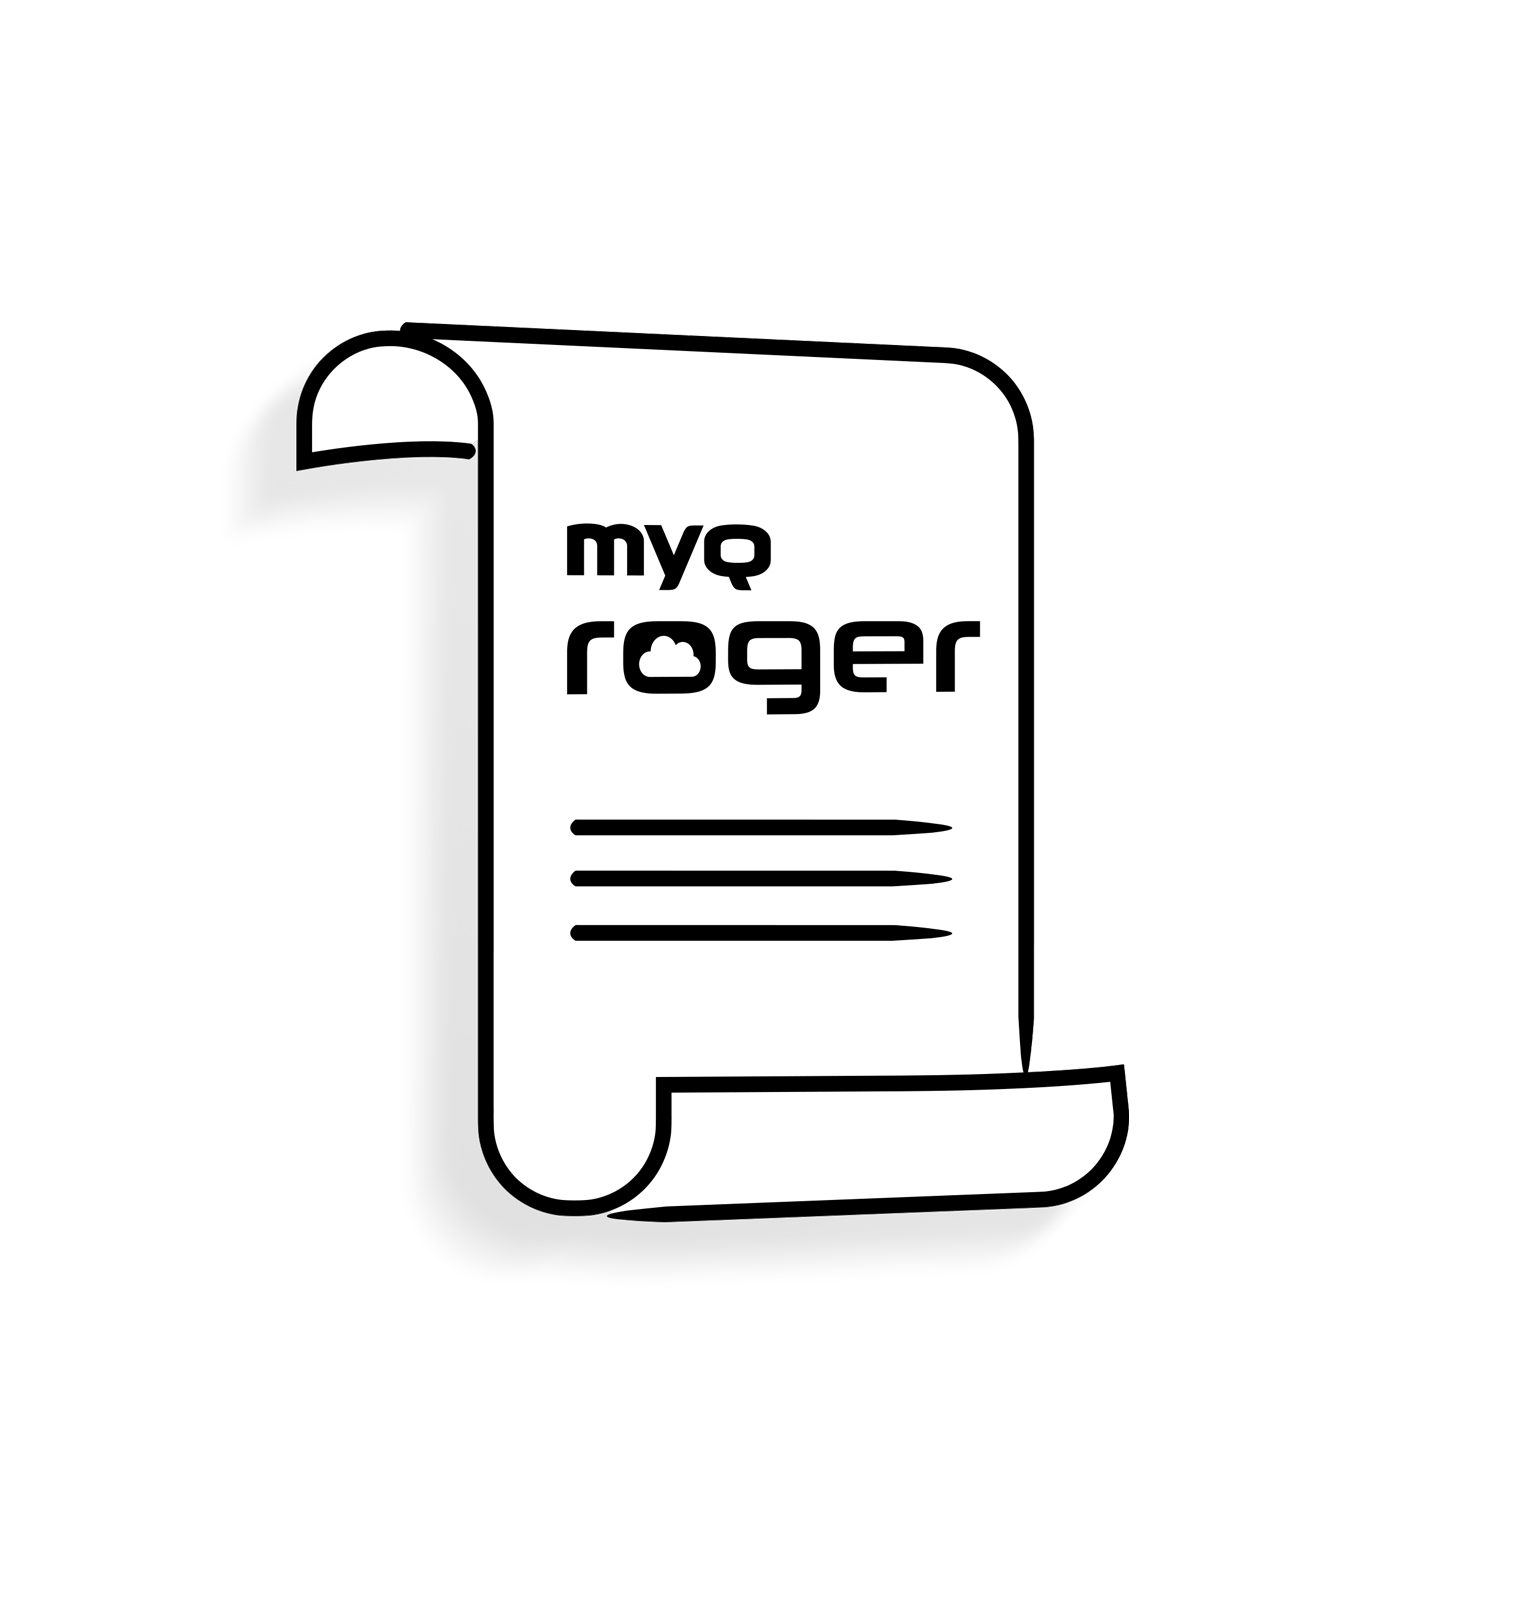 Documents related to MyQ Roger